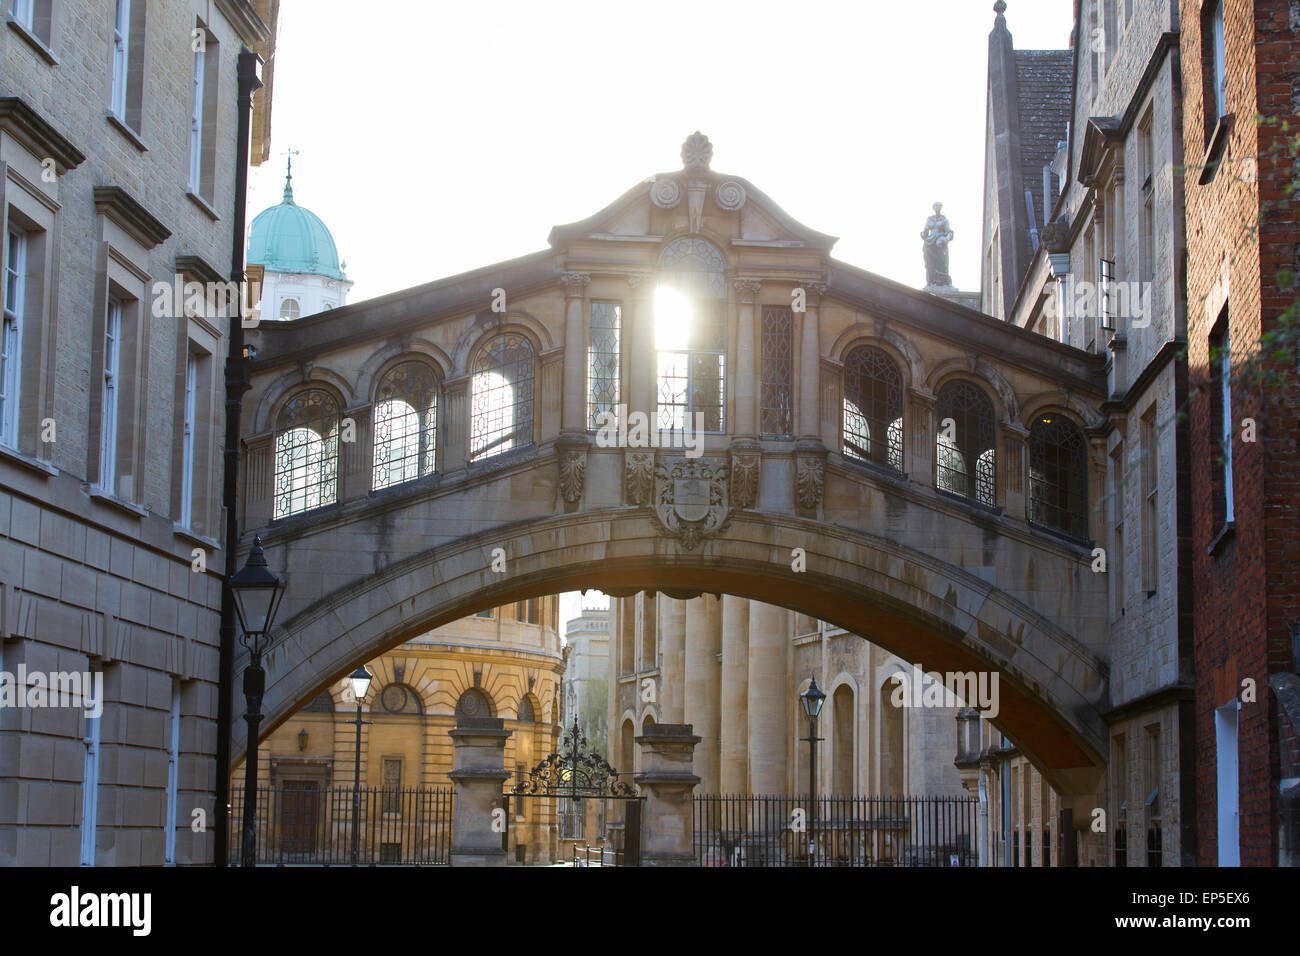 The Bridge Of Sighs, also known as Hertford Bridge in New College Lane, Oxford, UK Stock Photo